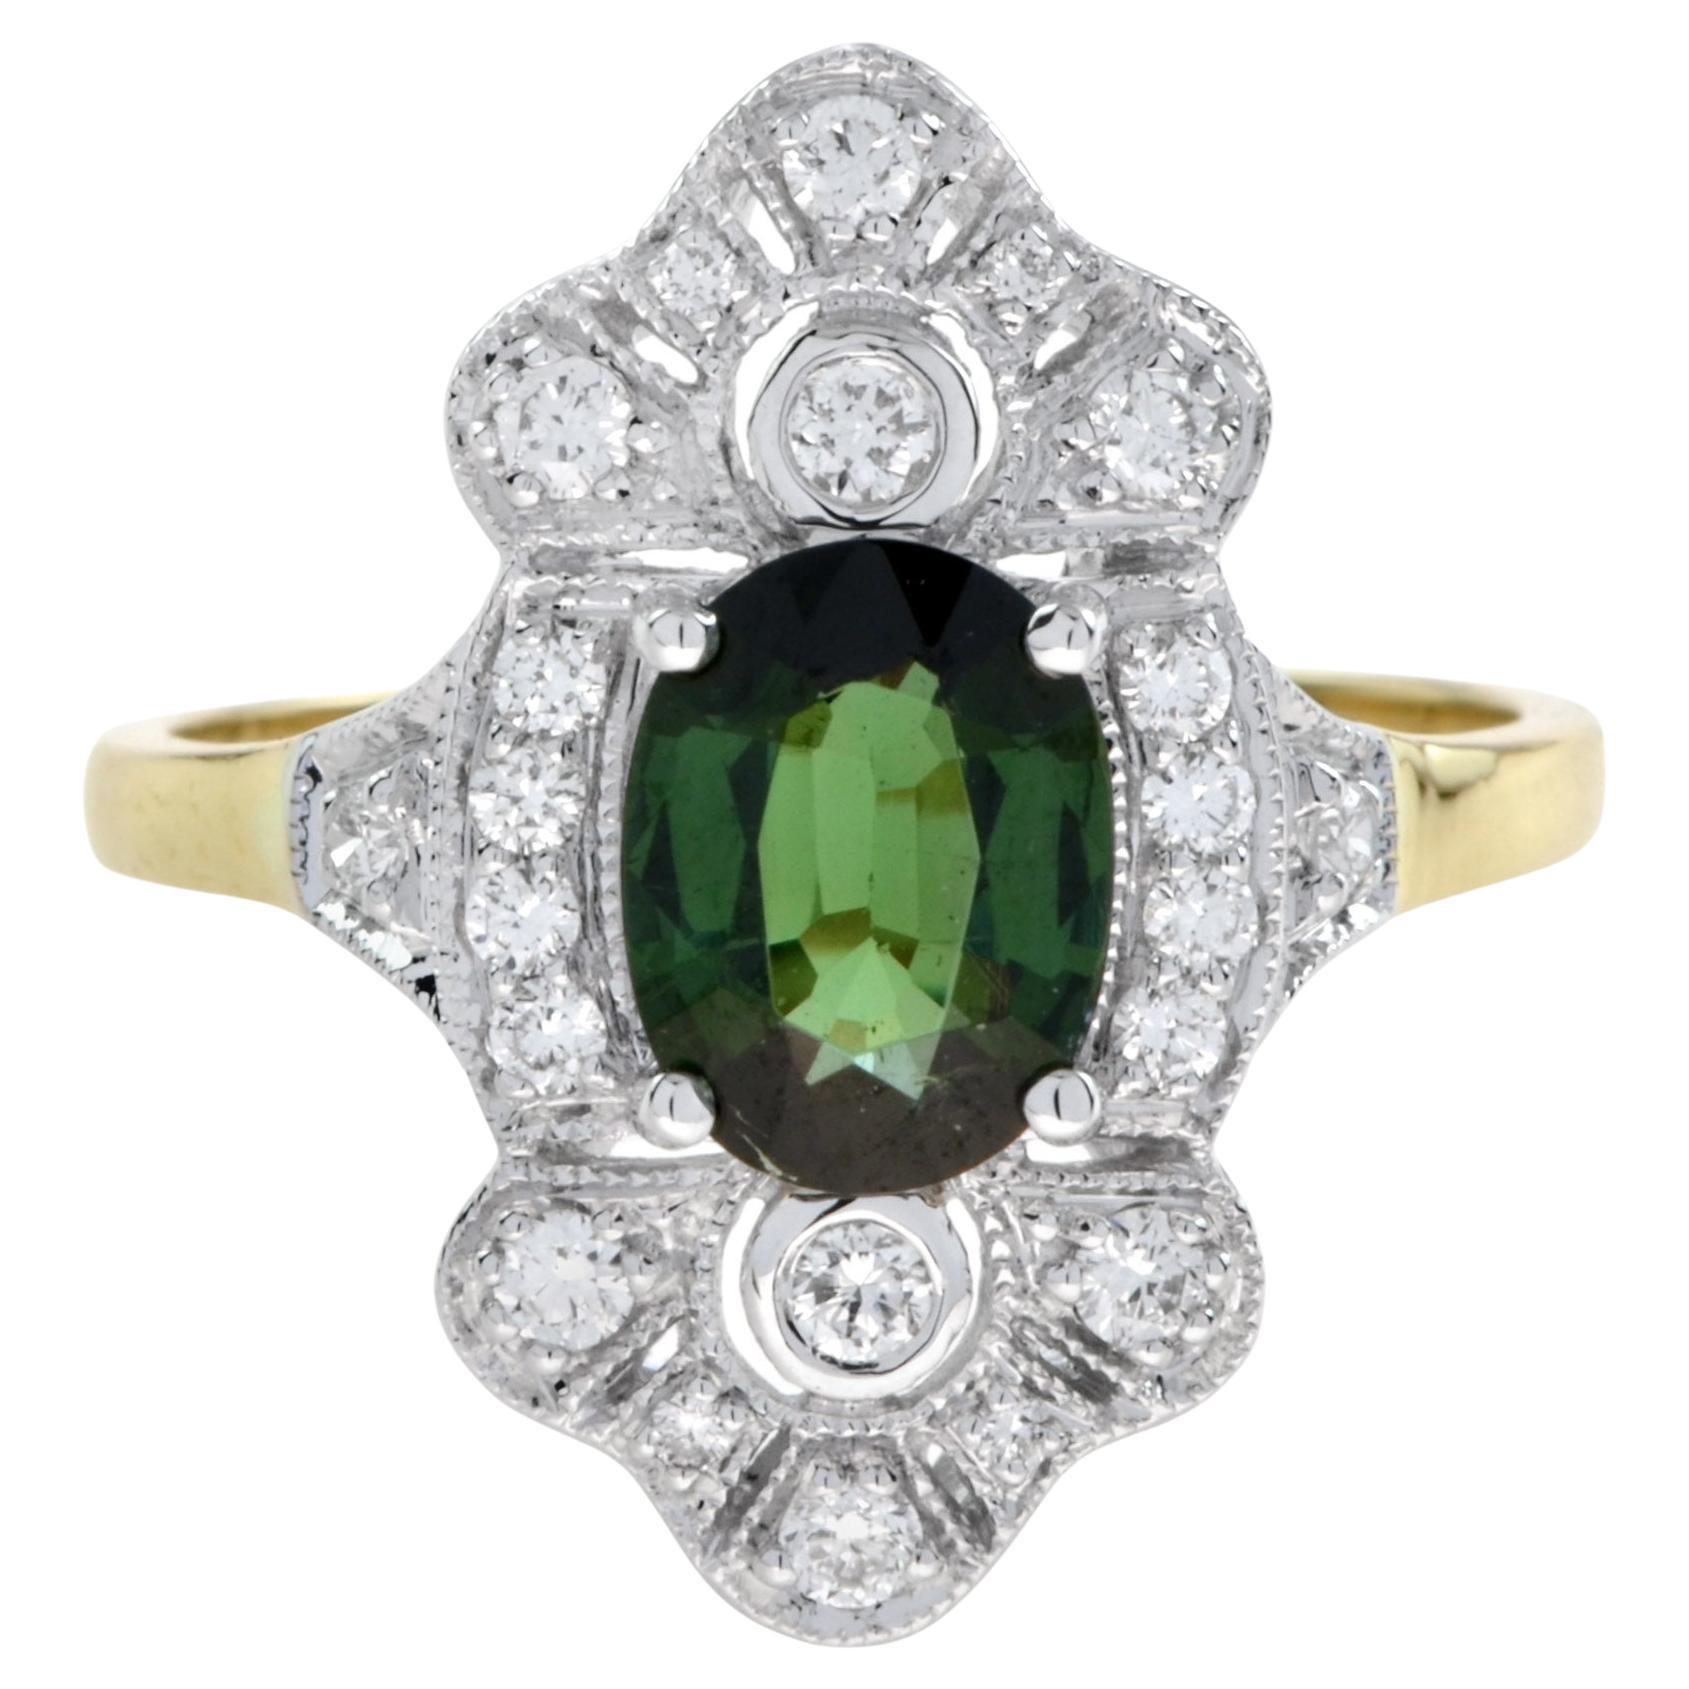 For Sale:  Art Deco Style Oval Green Tourmaline with Diamond Halo Ring in 18K Yellow Gold